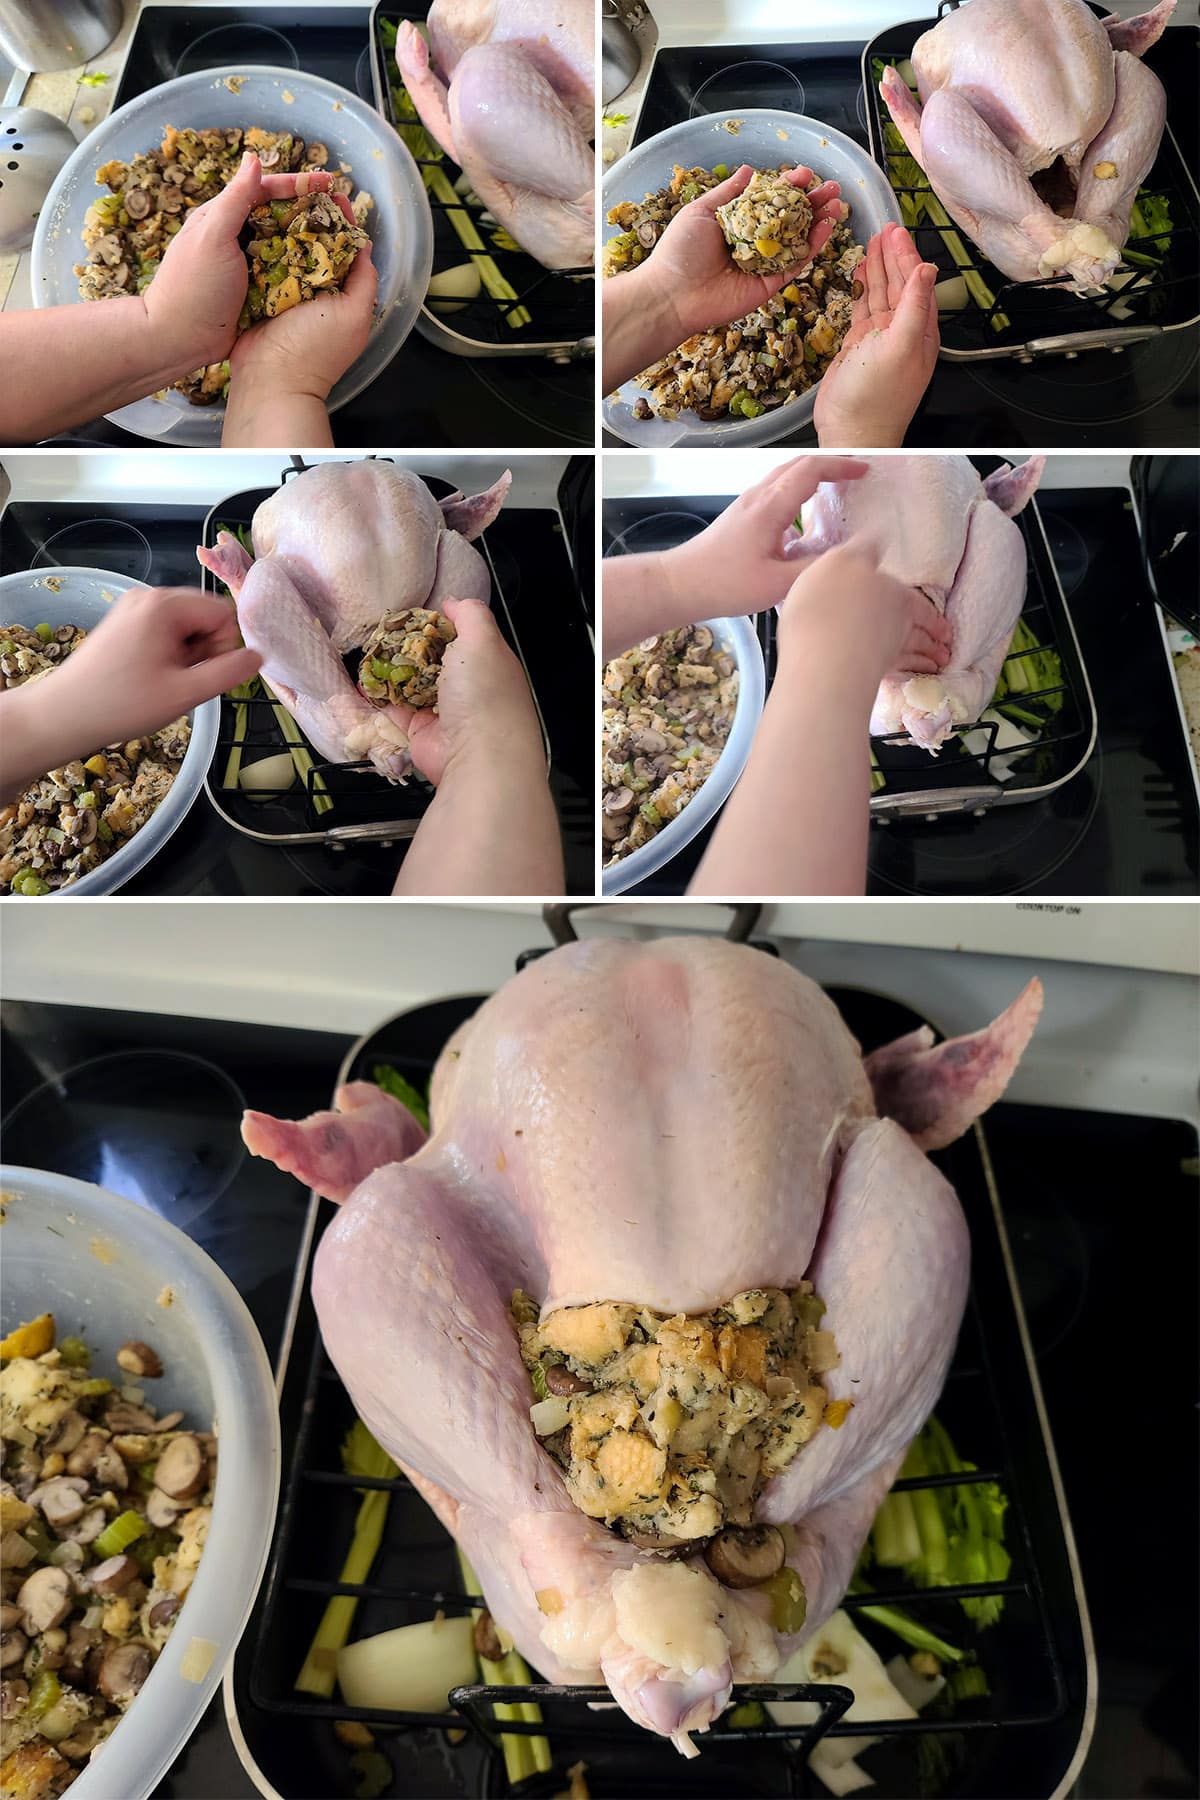 A 5 part image showing a raw turkey being stuffed.